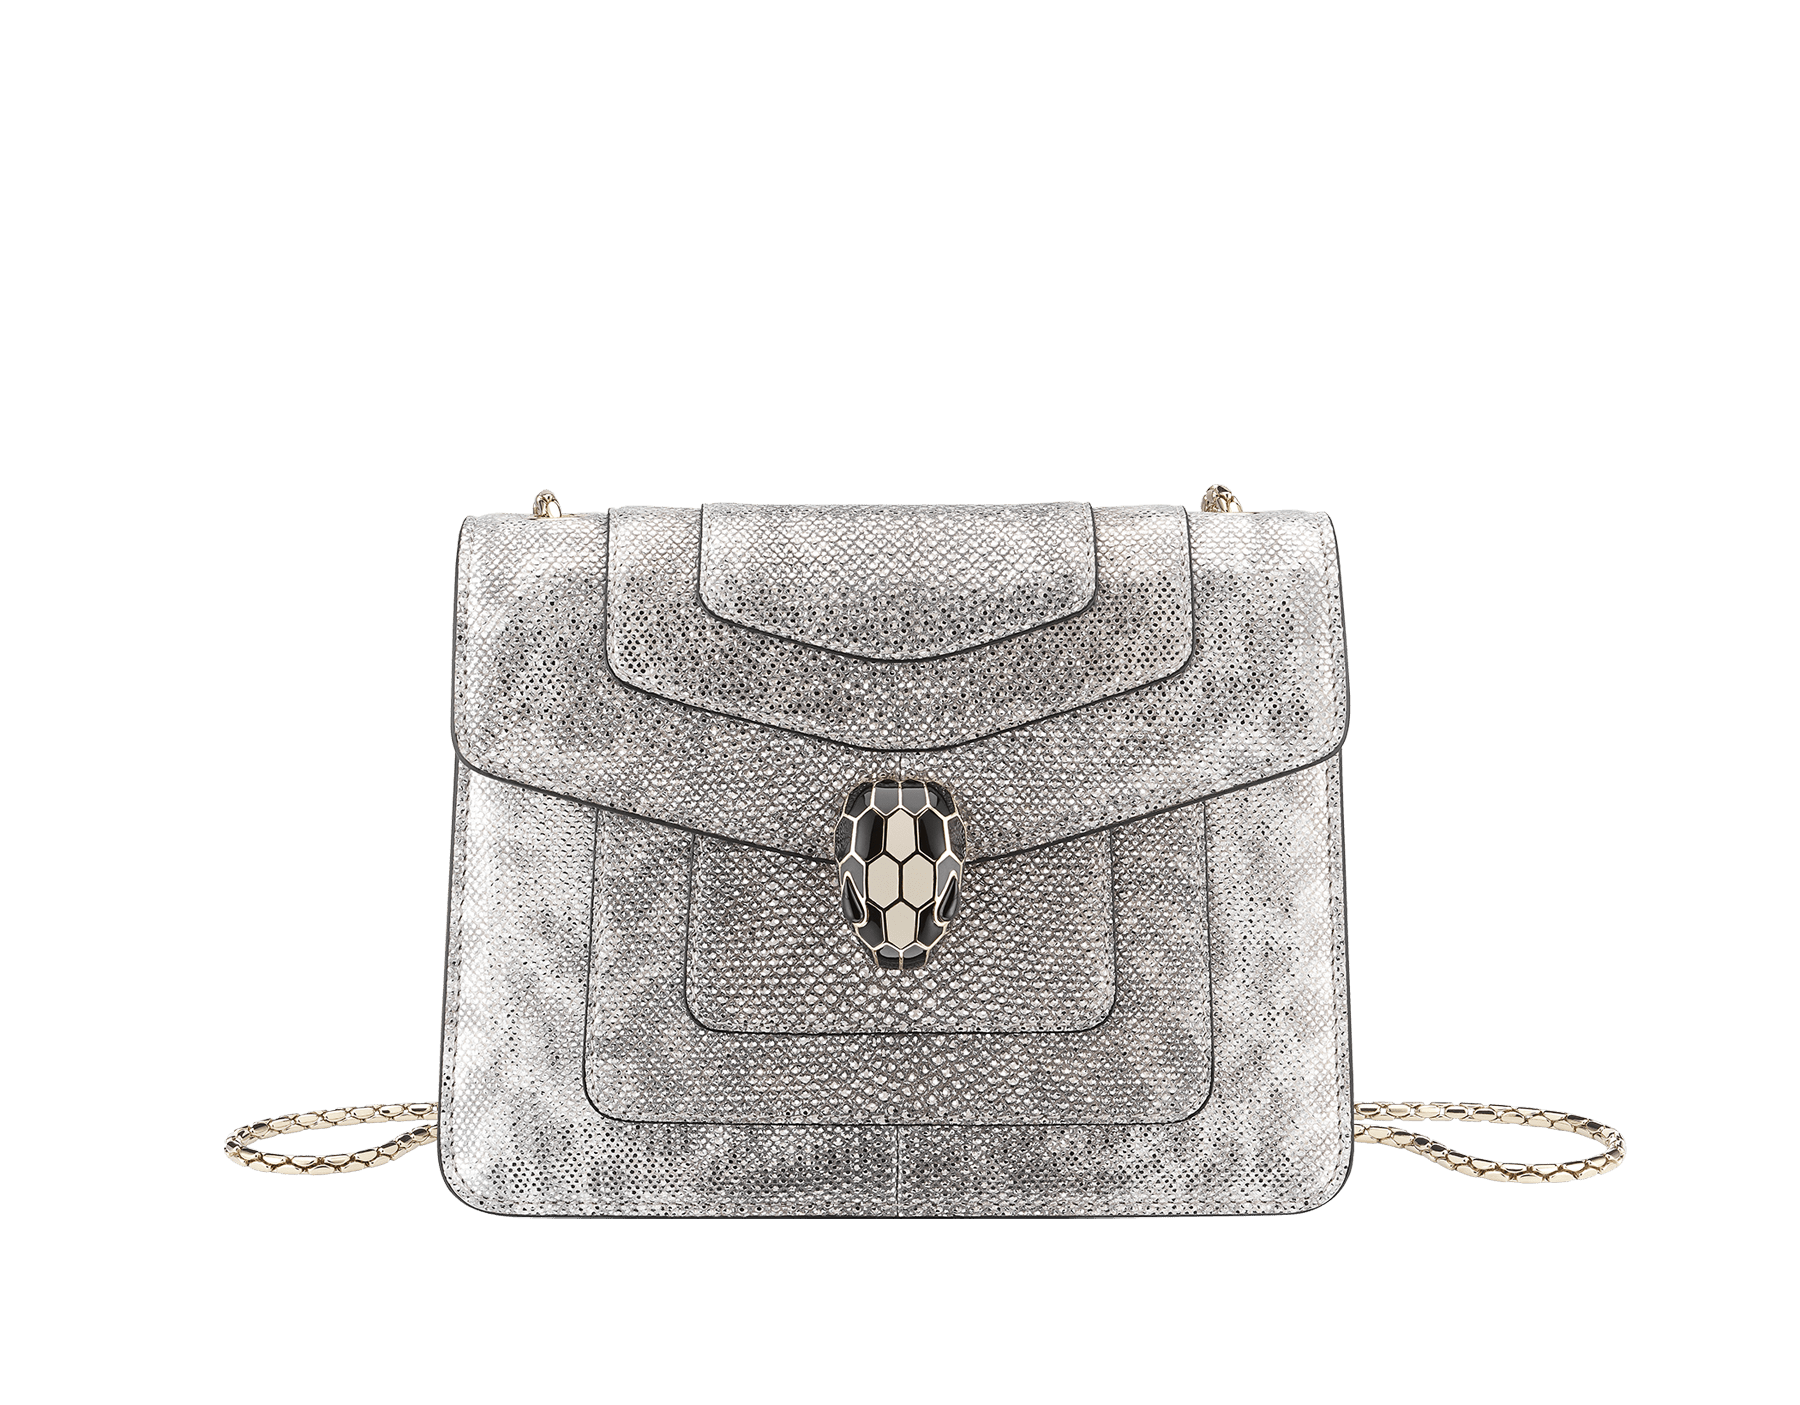 “Serpenti Forever” crossbody bag in multicolour "Shaded" karung skin with a pearled effect, and an Aquamarine light blue nappa leather internal lining. Tempting snakehead closure in palladium-plated brass, embellished with pearled lilac and matte Aquamarine light blue enamel, and black onyx eyes. 422-MK image 1